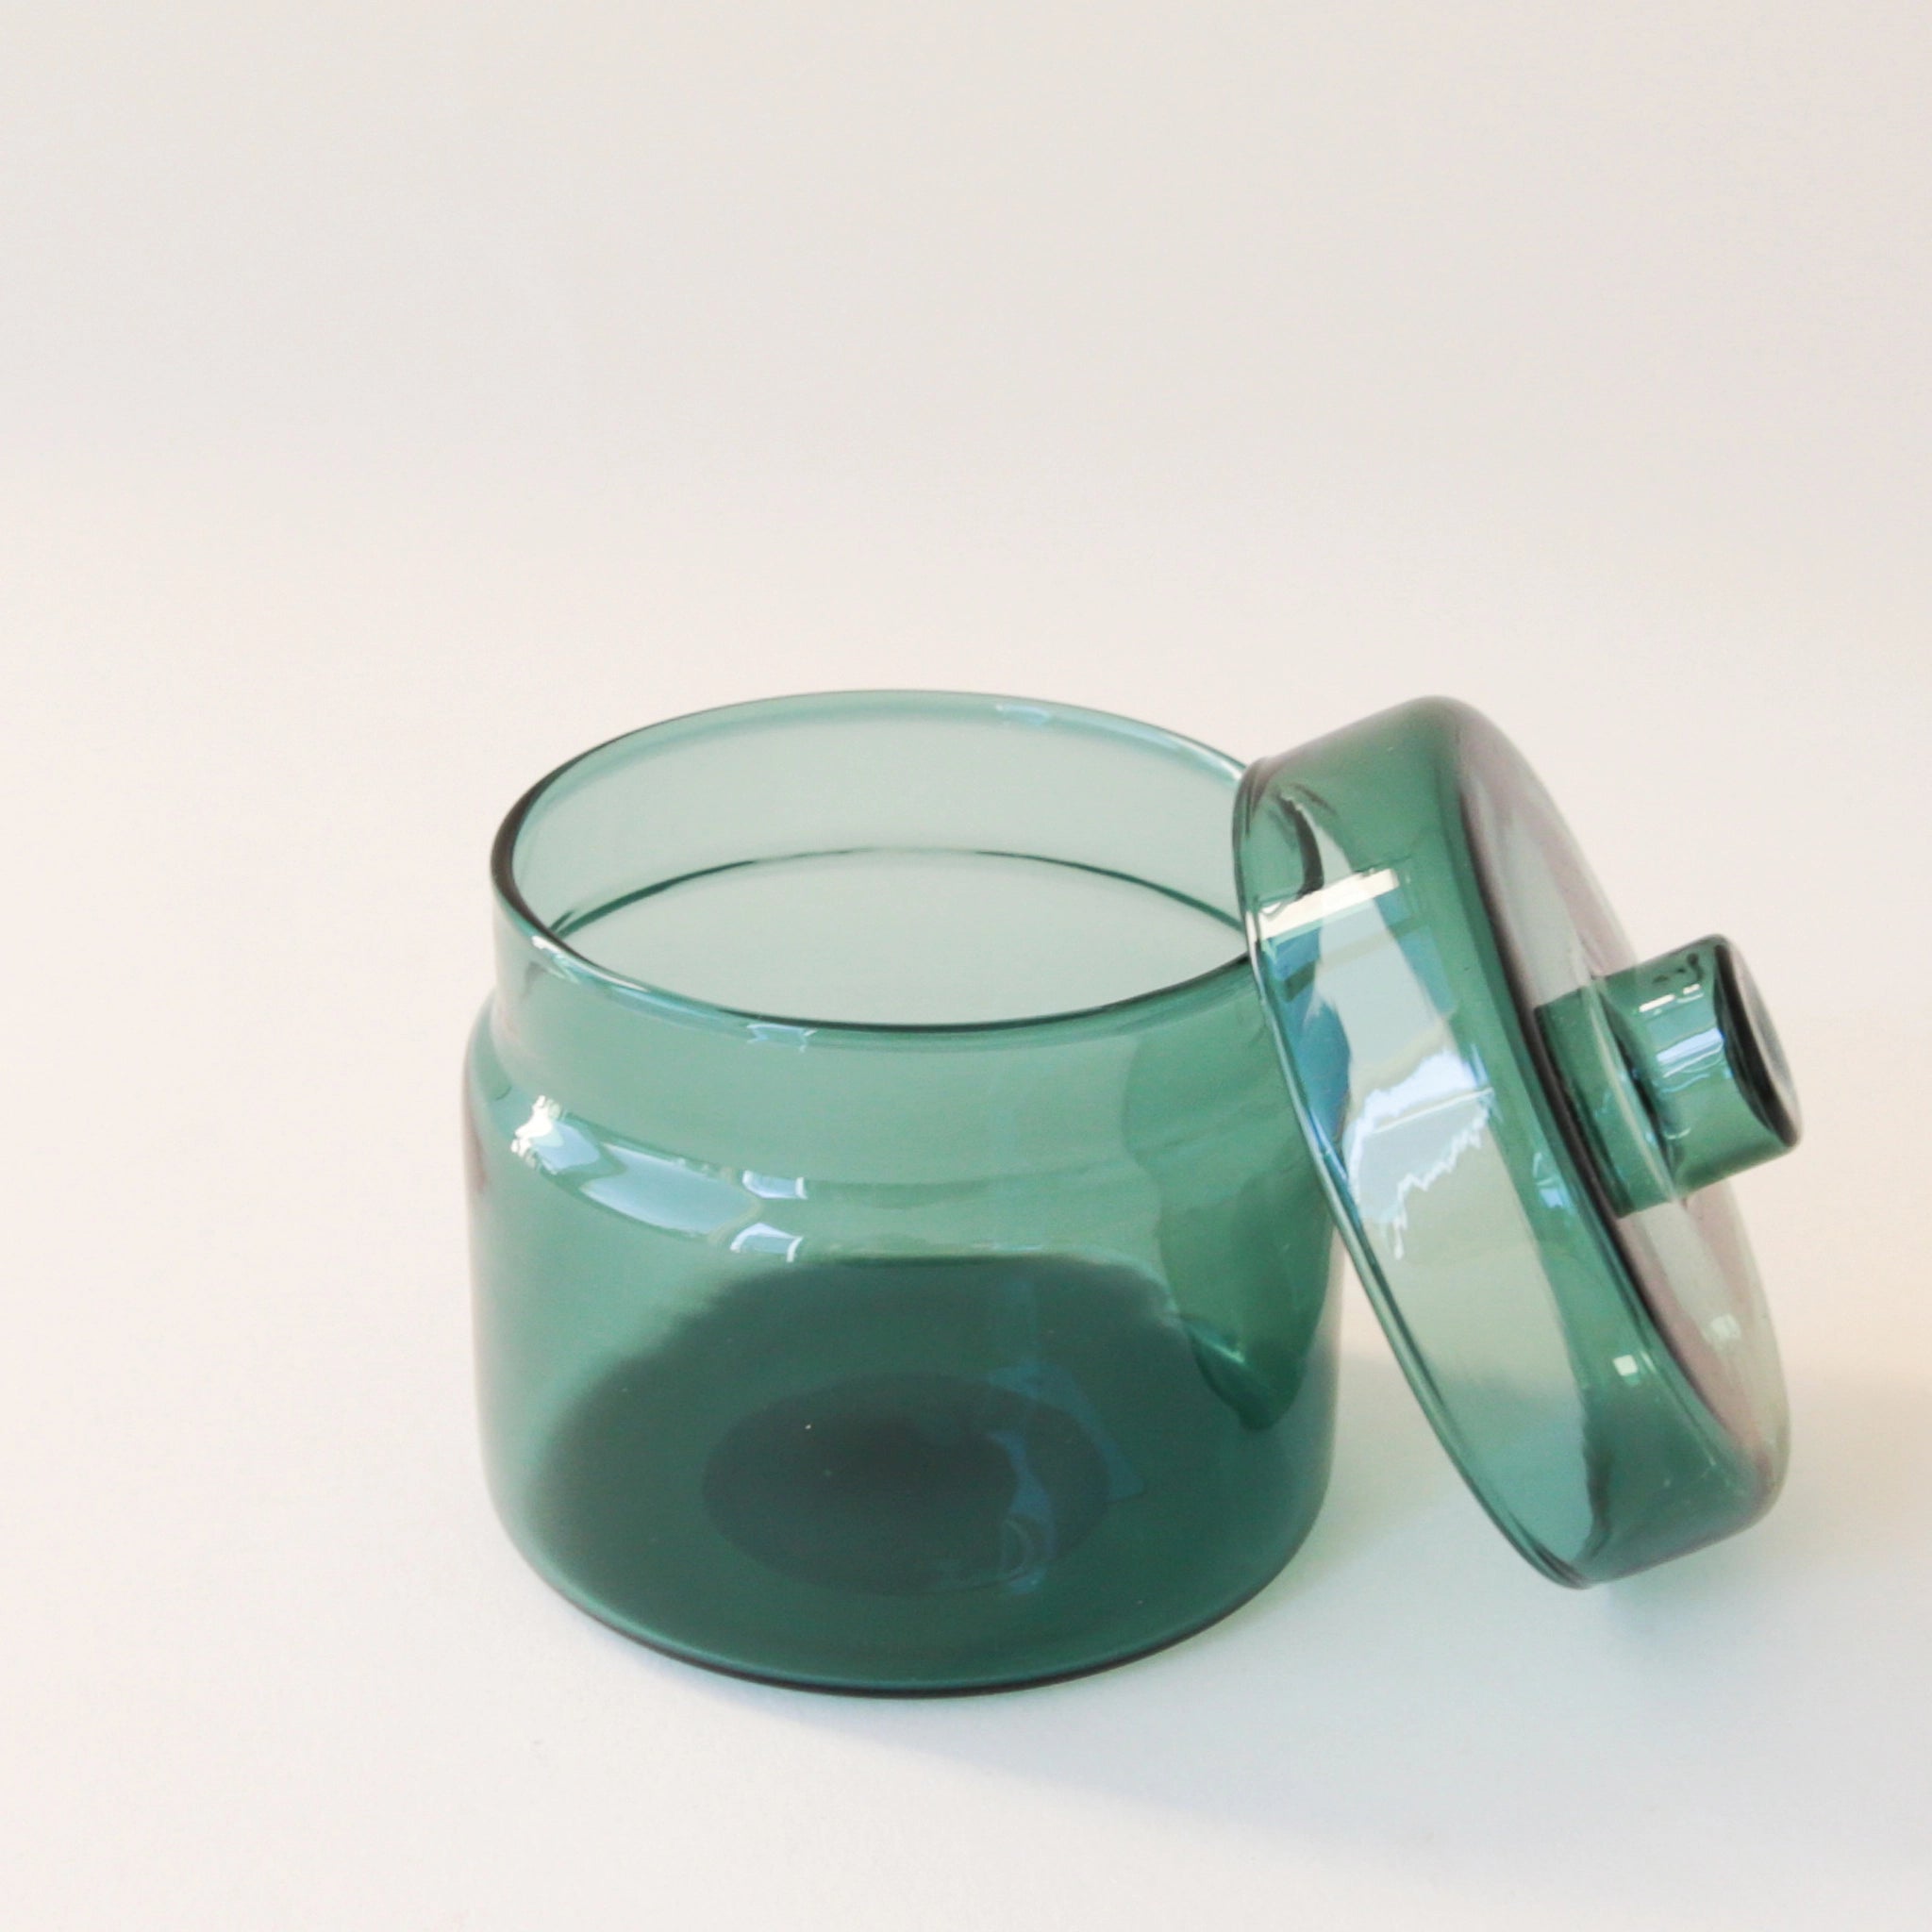 A round glass teal jar with a coordinating glass lid and a round but flat knob on top.